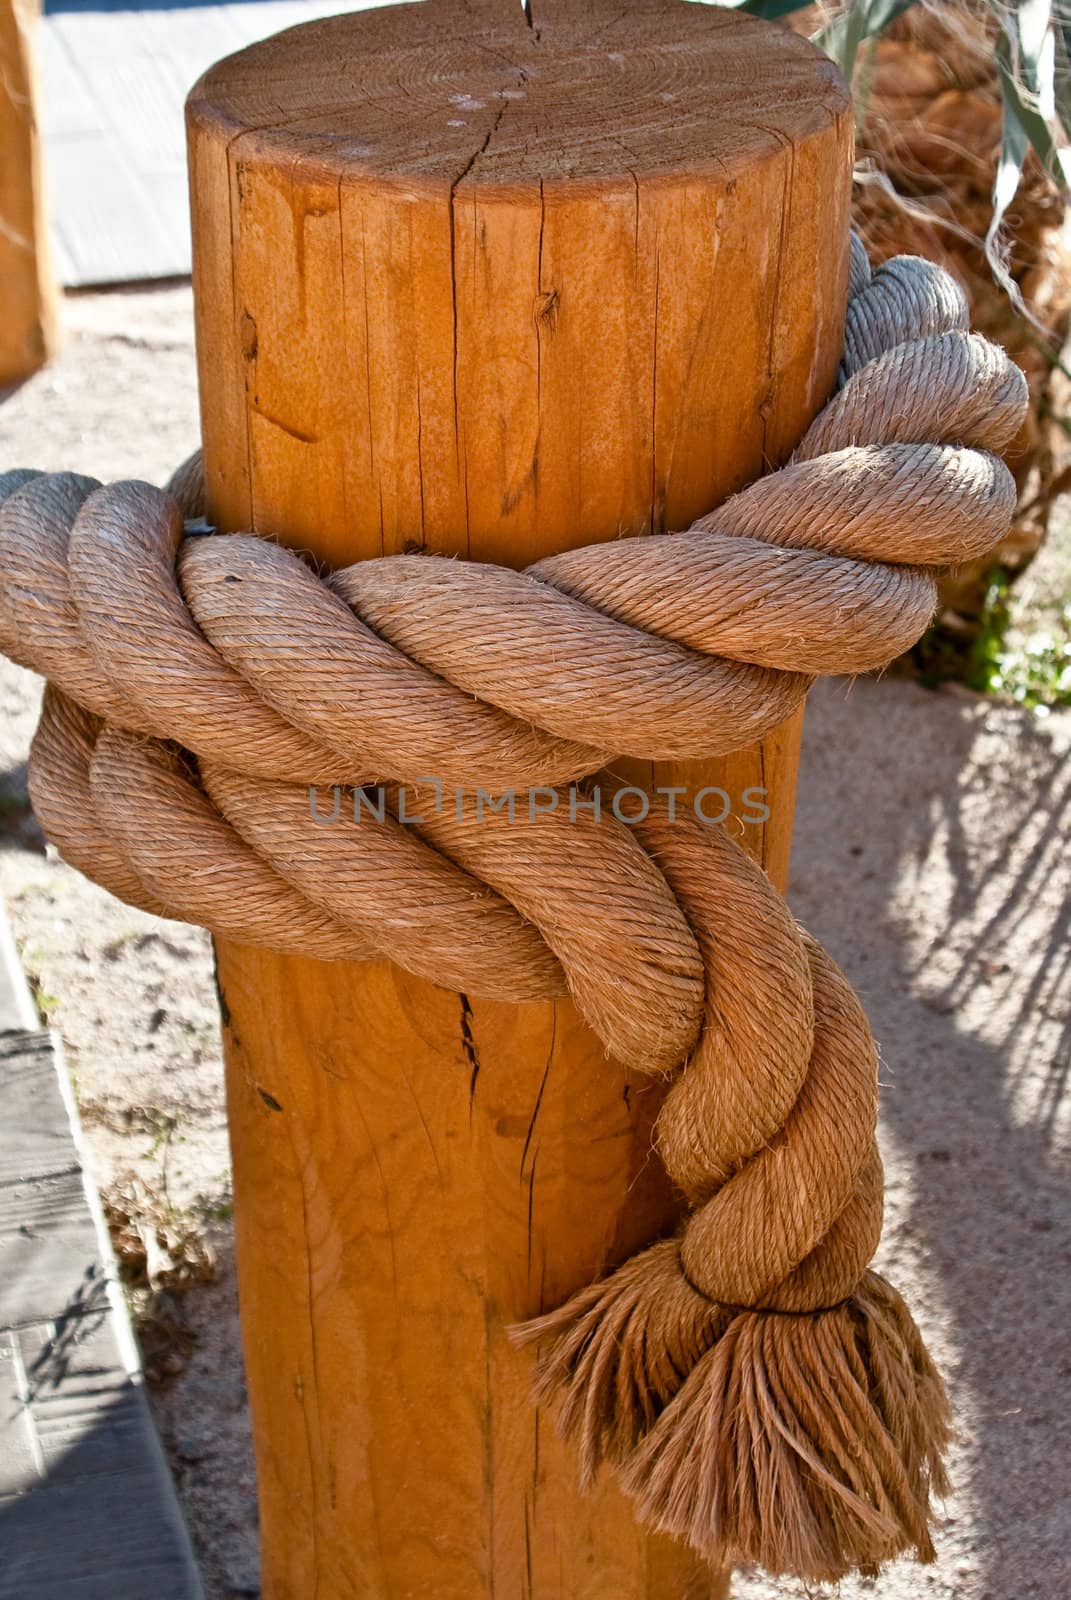 Rope on a Post 2 by emattil